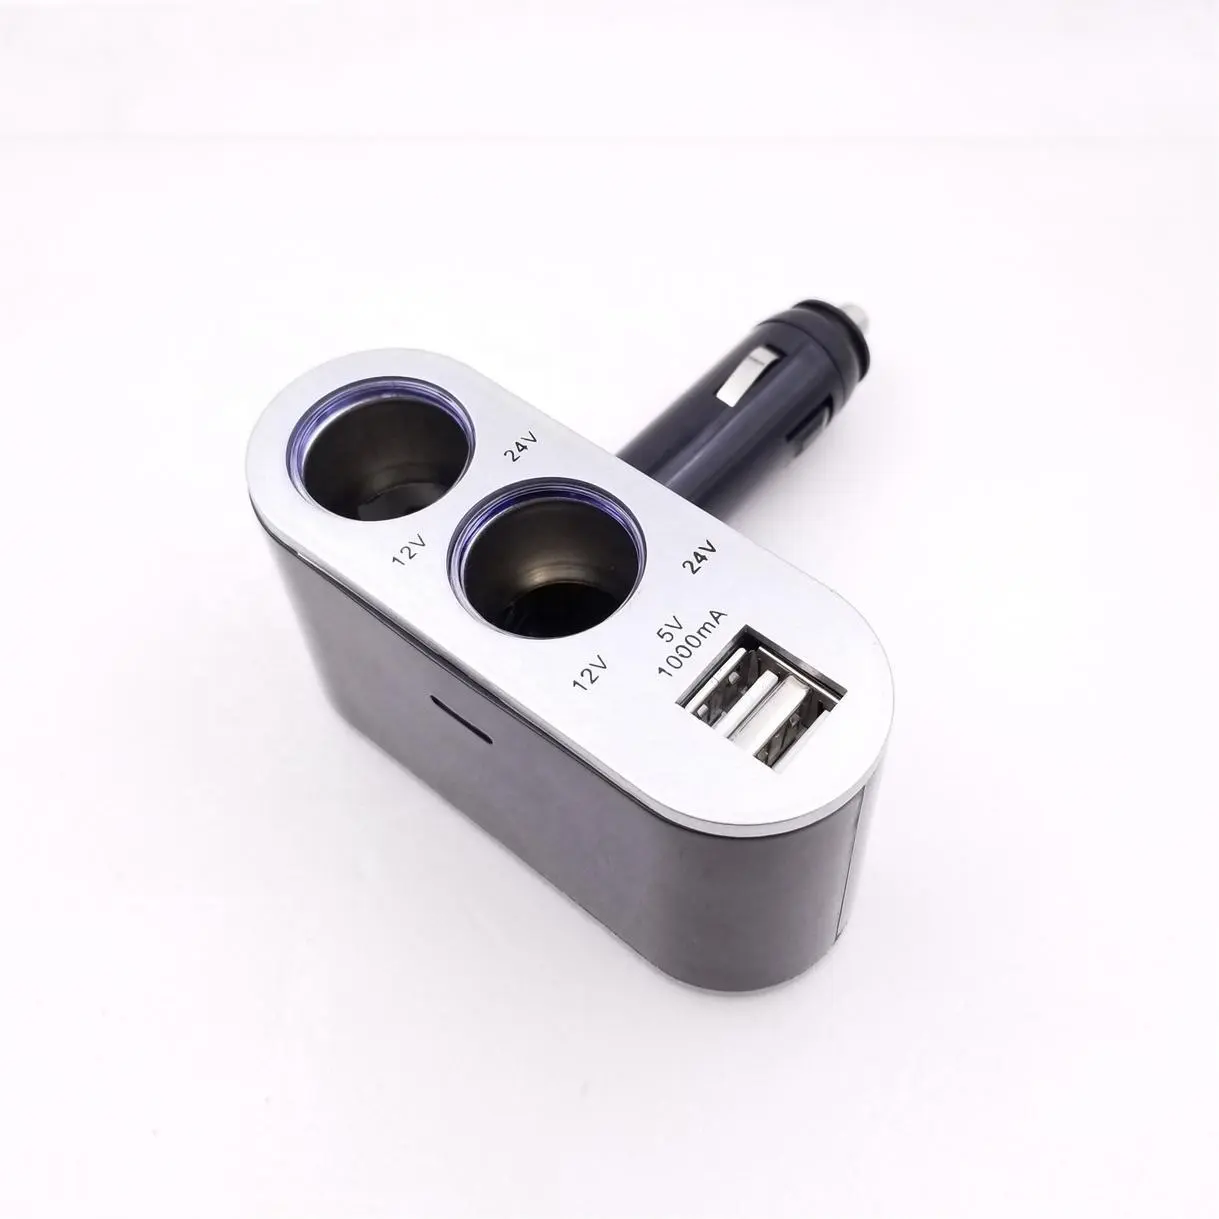 Dual USB Car Cigarette Lighter 3.1A High Power 90 Degree Foldable Car Charger